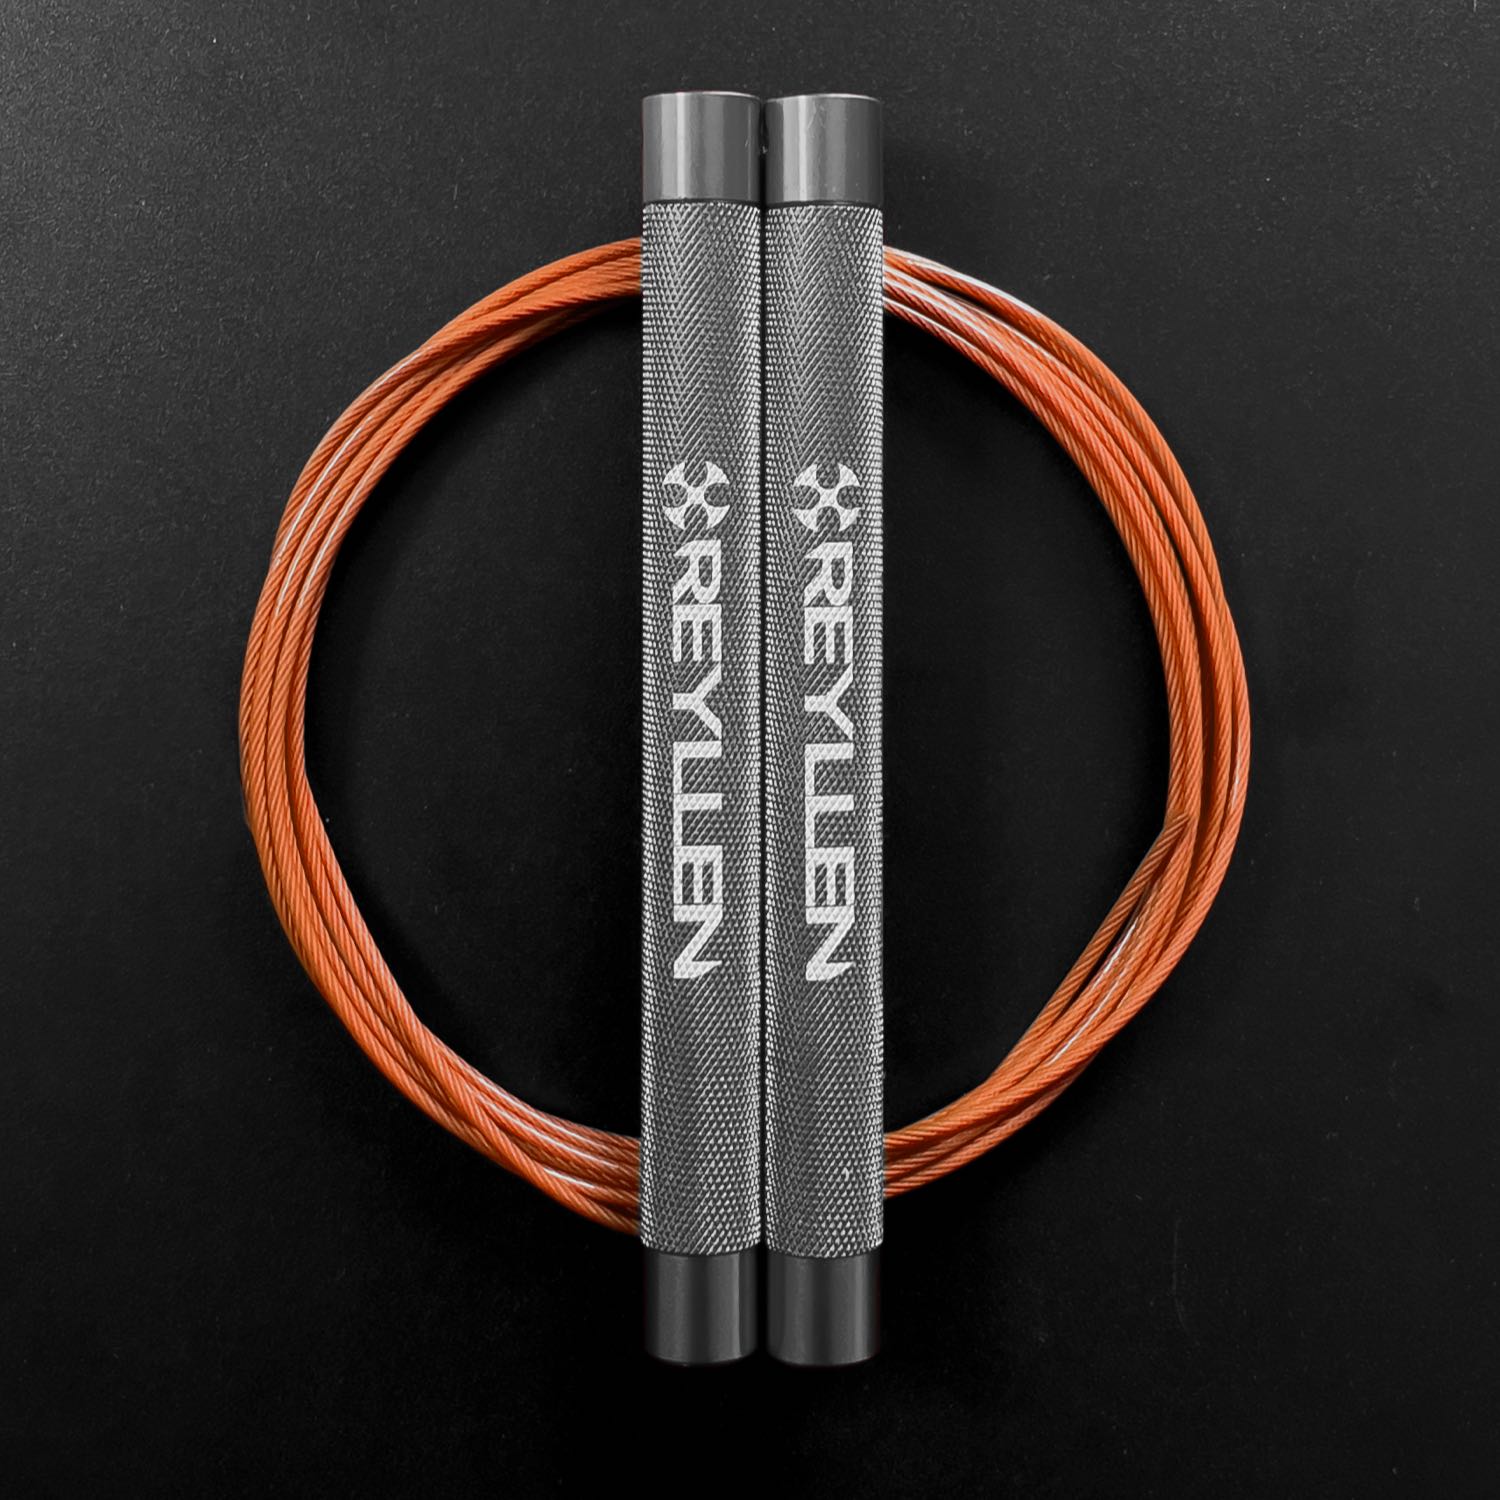 Reyllen Flare Mx Speed Skipping Jump Rope - Aluminium Handles - silver with orange nylon coated cable